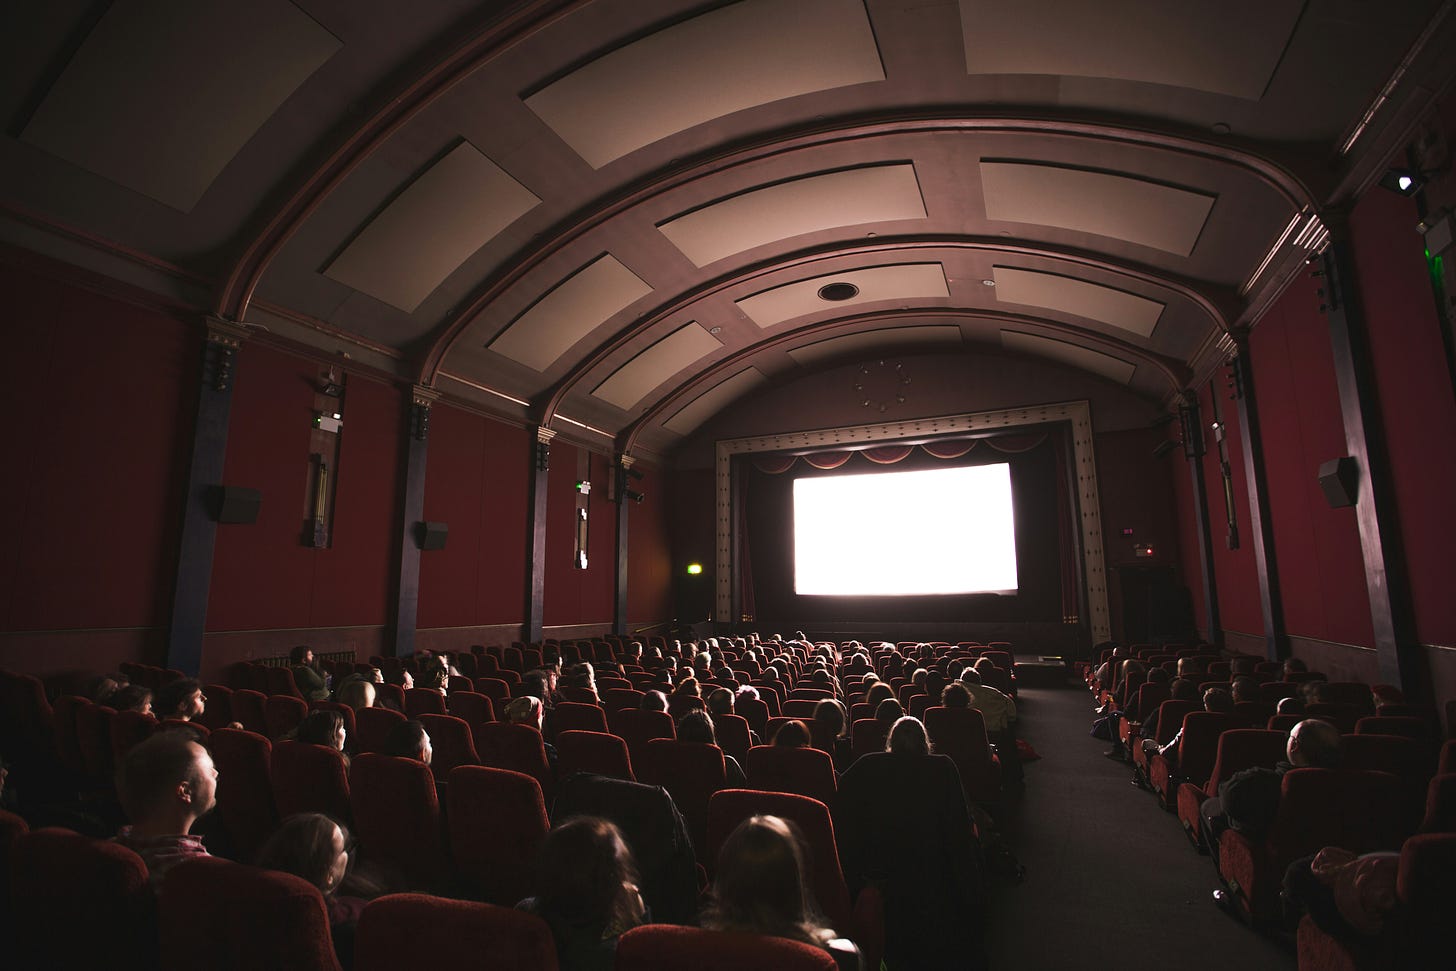 Photo of interior of movie theater filled with people in seats